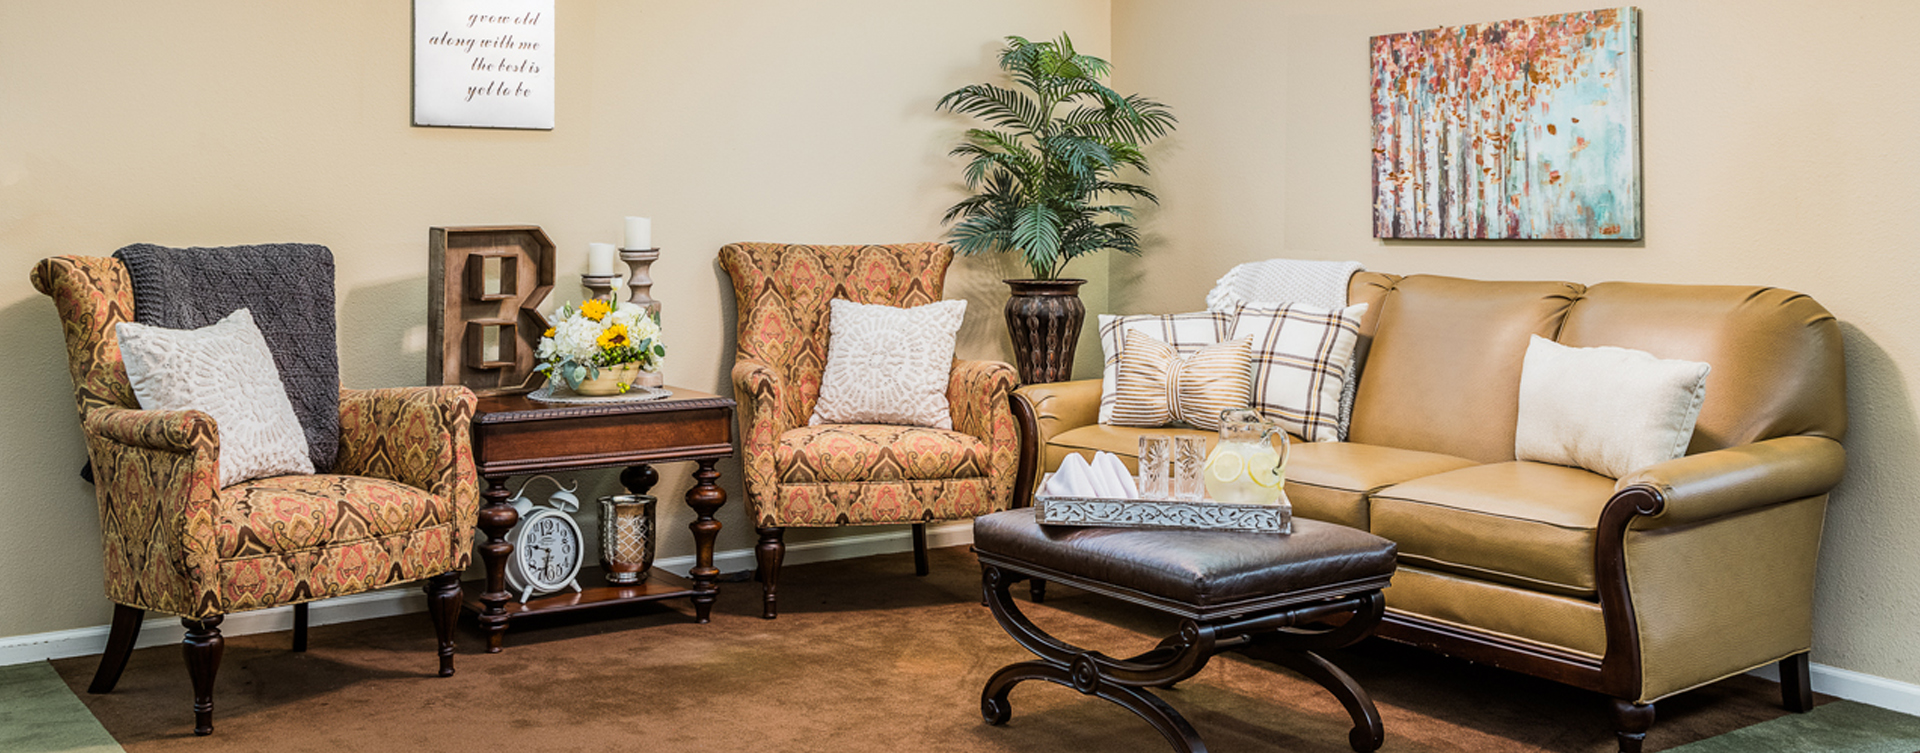 Enjoy a good snooze in the sitting area at Bickford of Fort Dodge